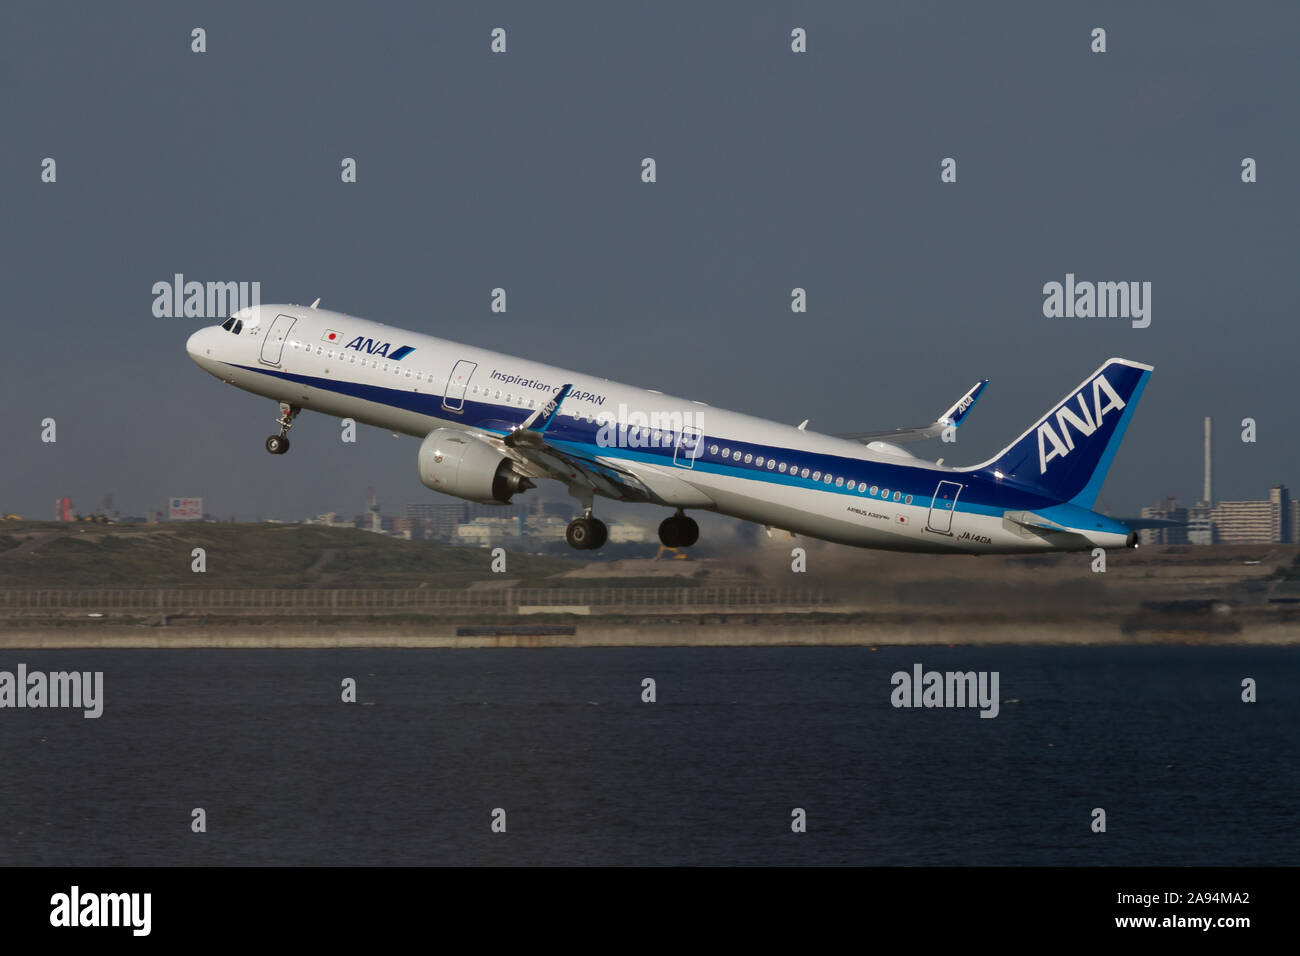 An All Nippon Airways Ana Airbus A321 272n Taking Off From Haneda Airport Tokyo Japan Thursday May 16th 19 Stock Photo Alamy